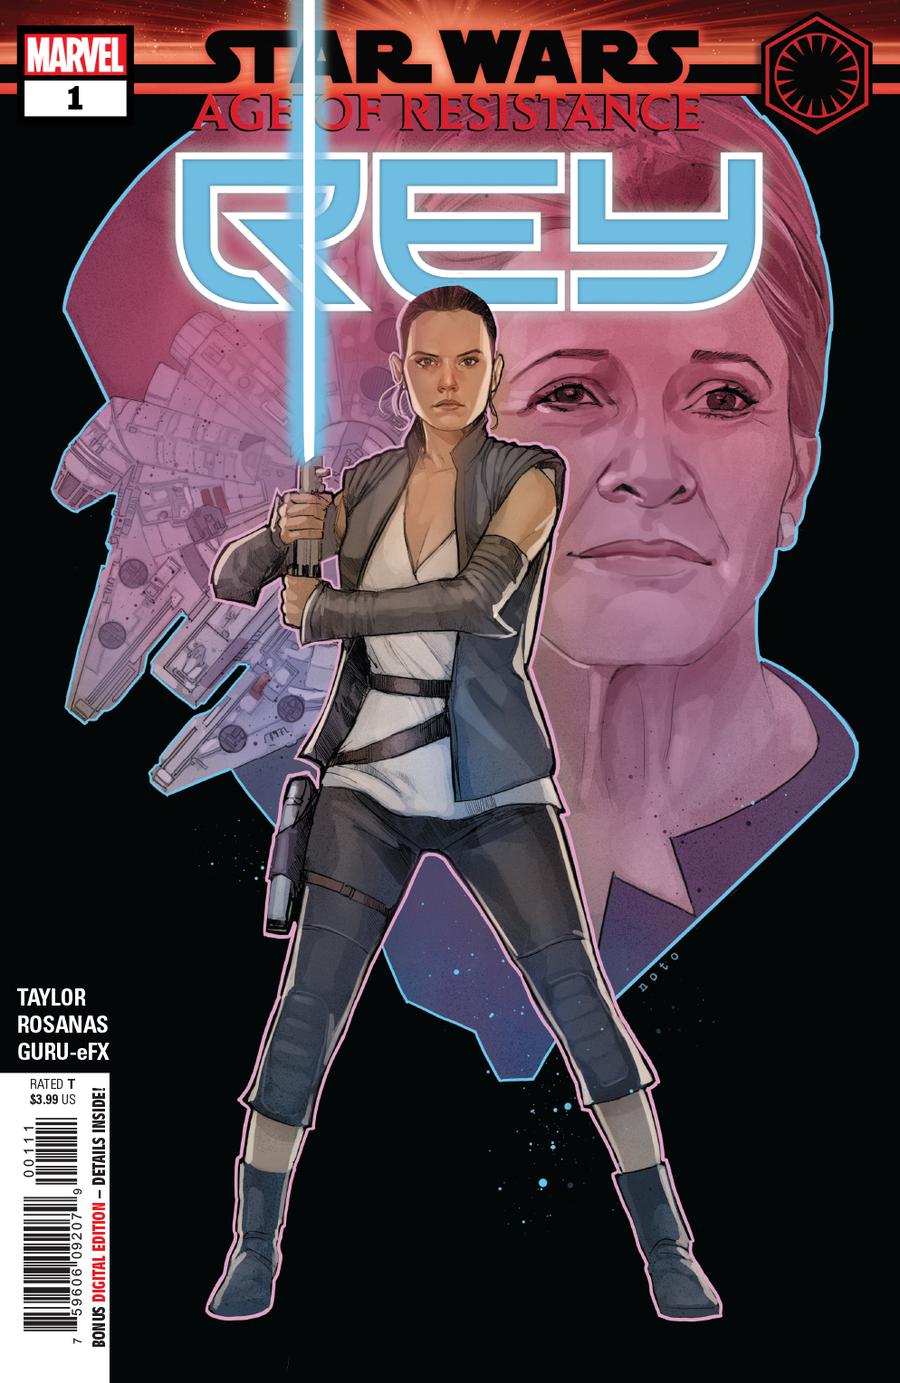 Star Wars Age Of Resistance Rey #1 Cover A Regular Phil Noto Cover